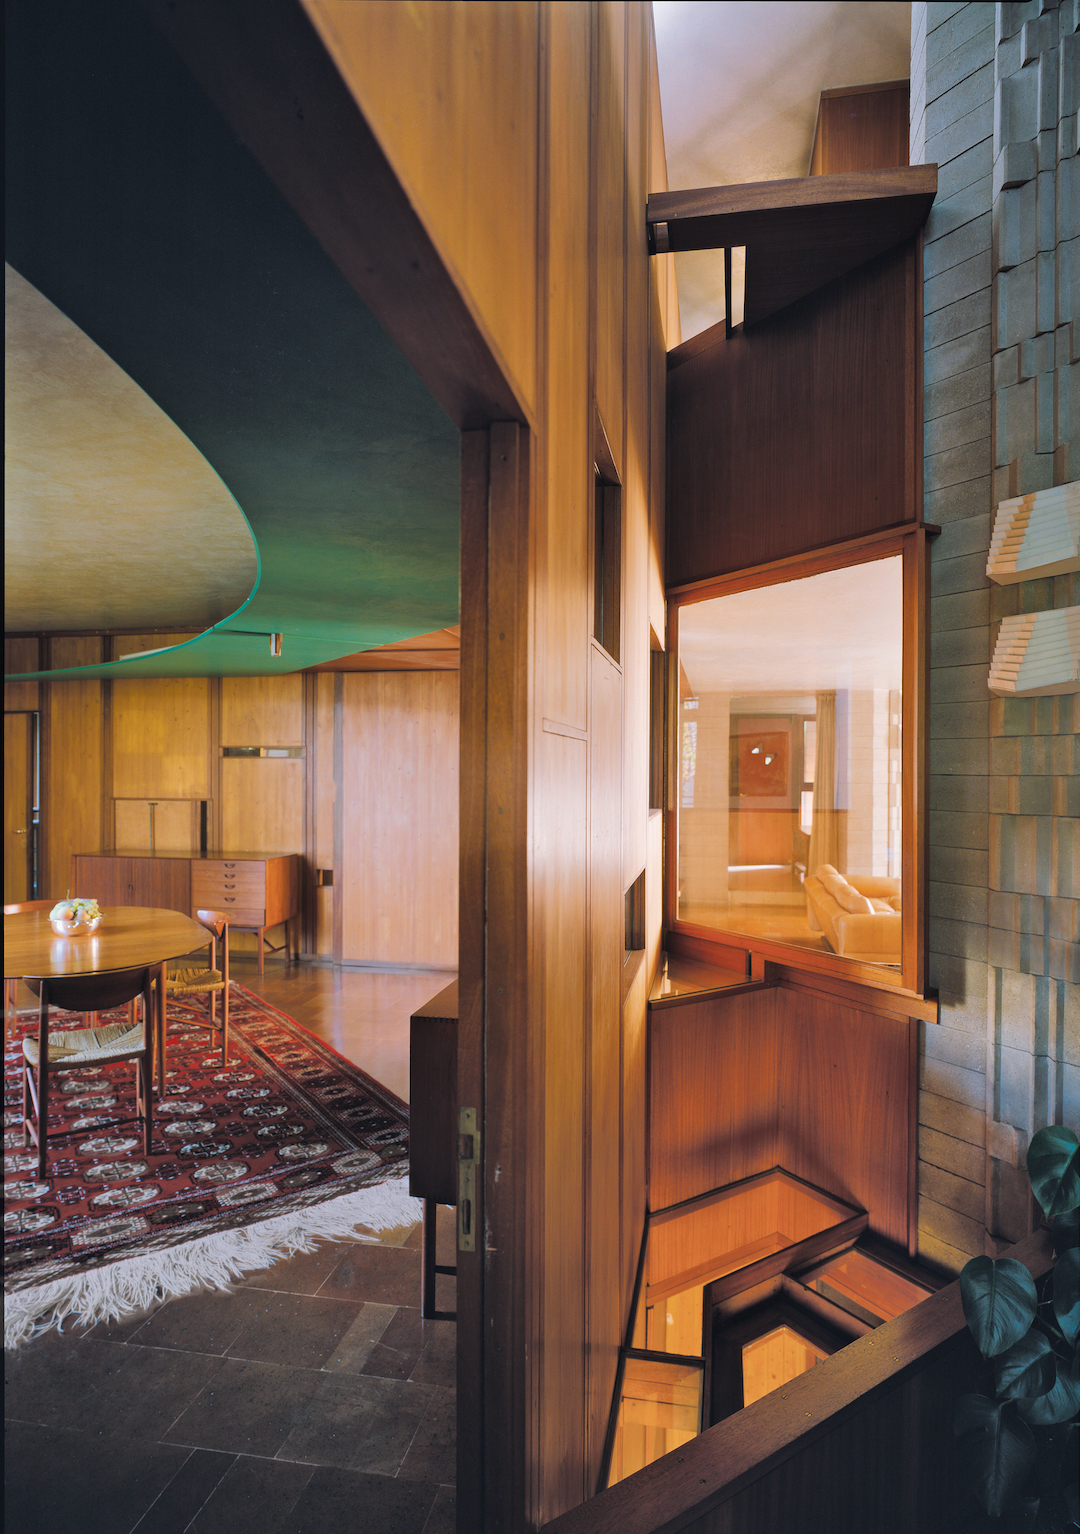 Veritti House, Udine, 1955-6; view of dining room (l) and vertical light-well (r). © Aldo Ballo